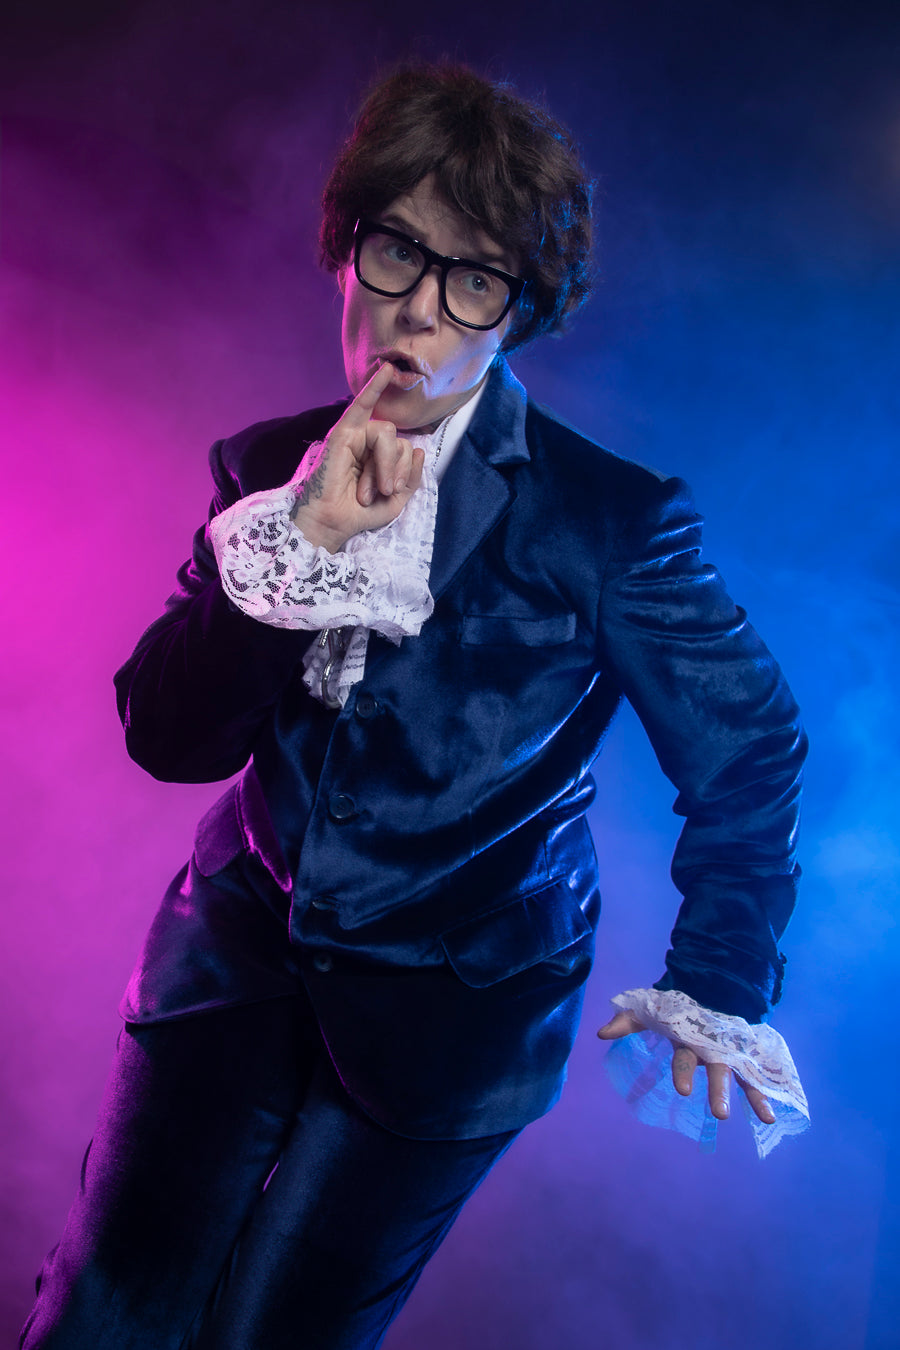 Austin Powers Costume Hire or Cosplay, plus Makeup and Photography. Proudly by and available at, Little Shop of Horrors Costumery Mornington & Melbourne